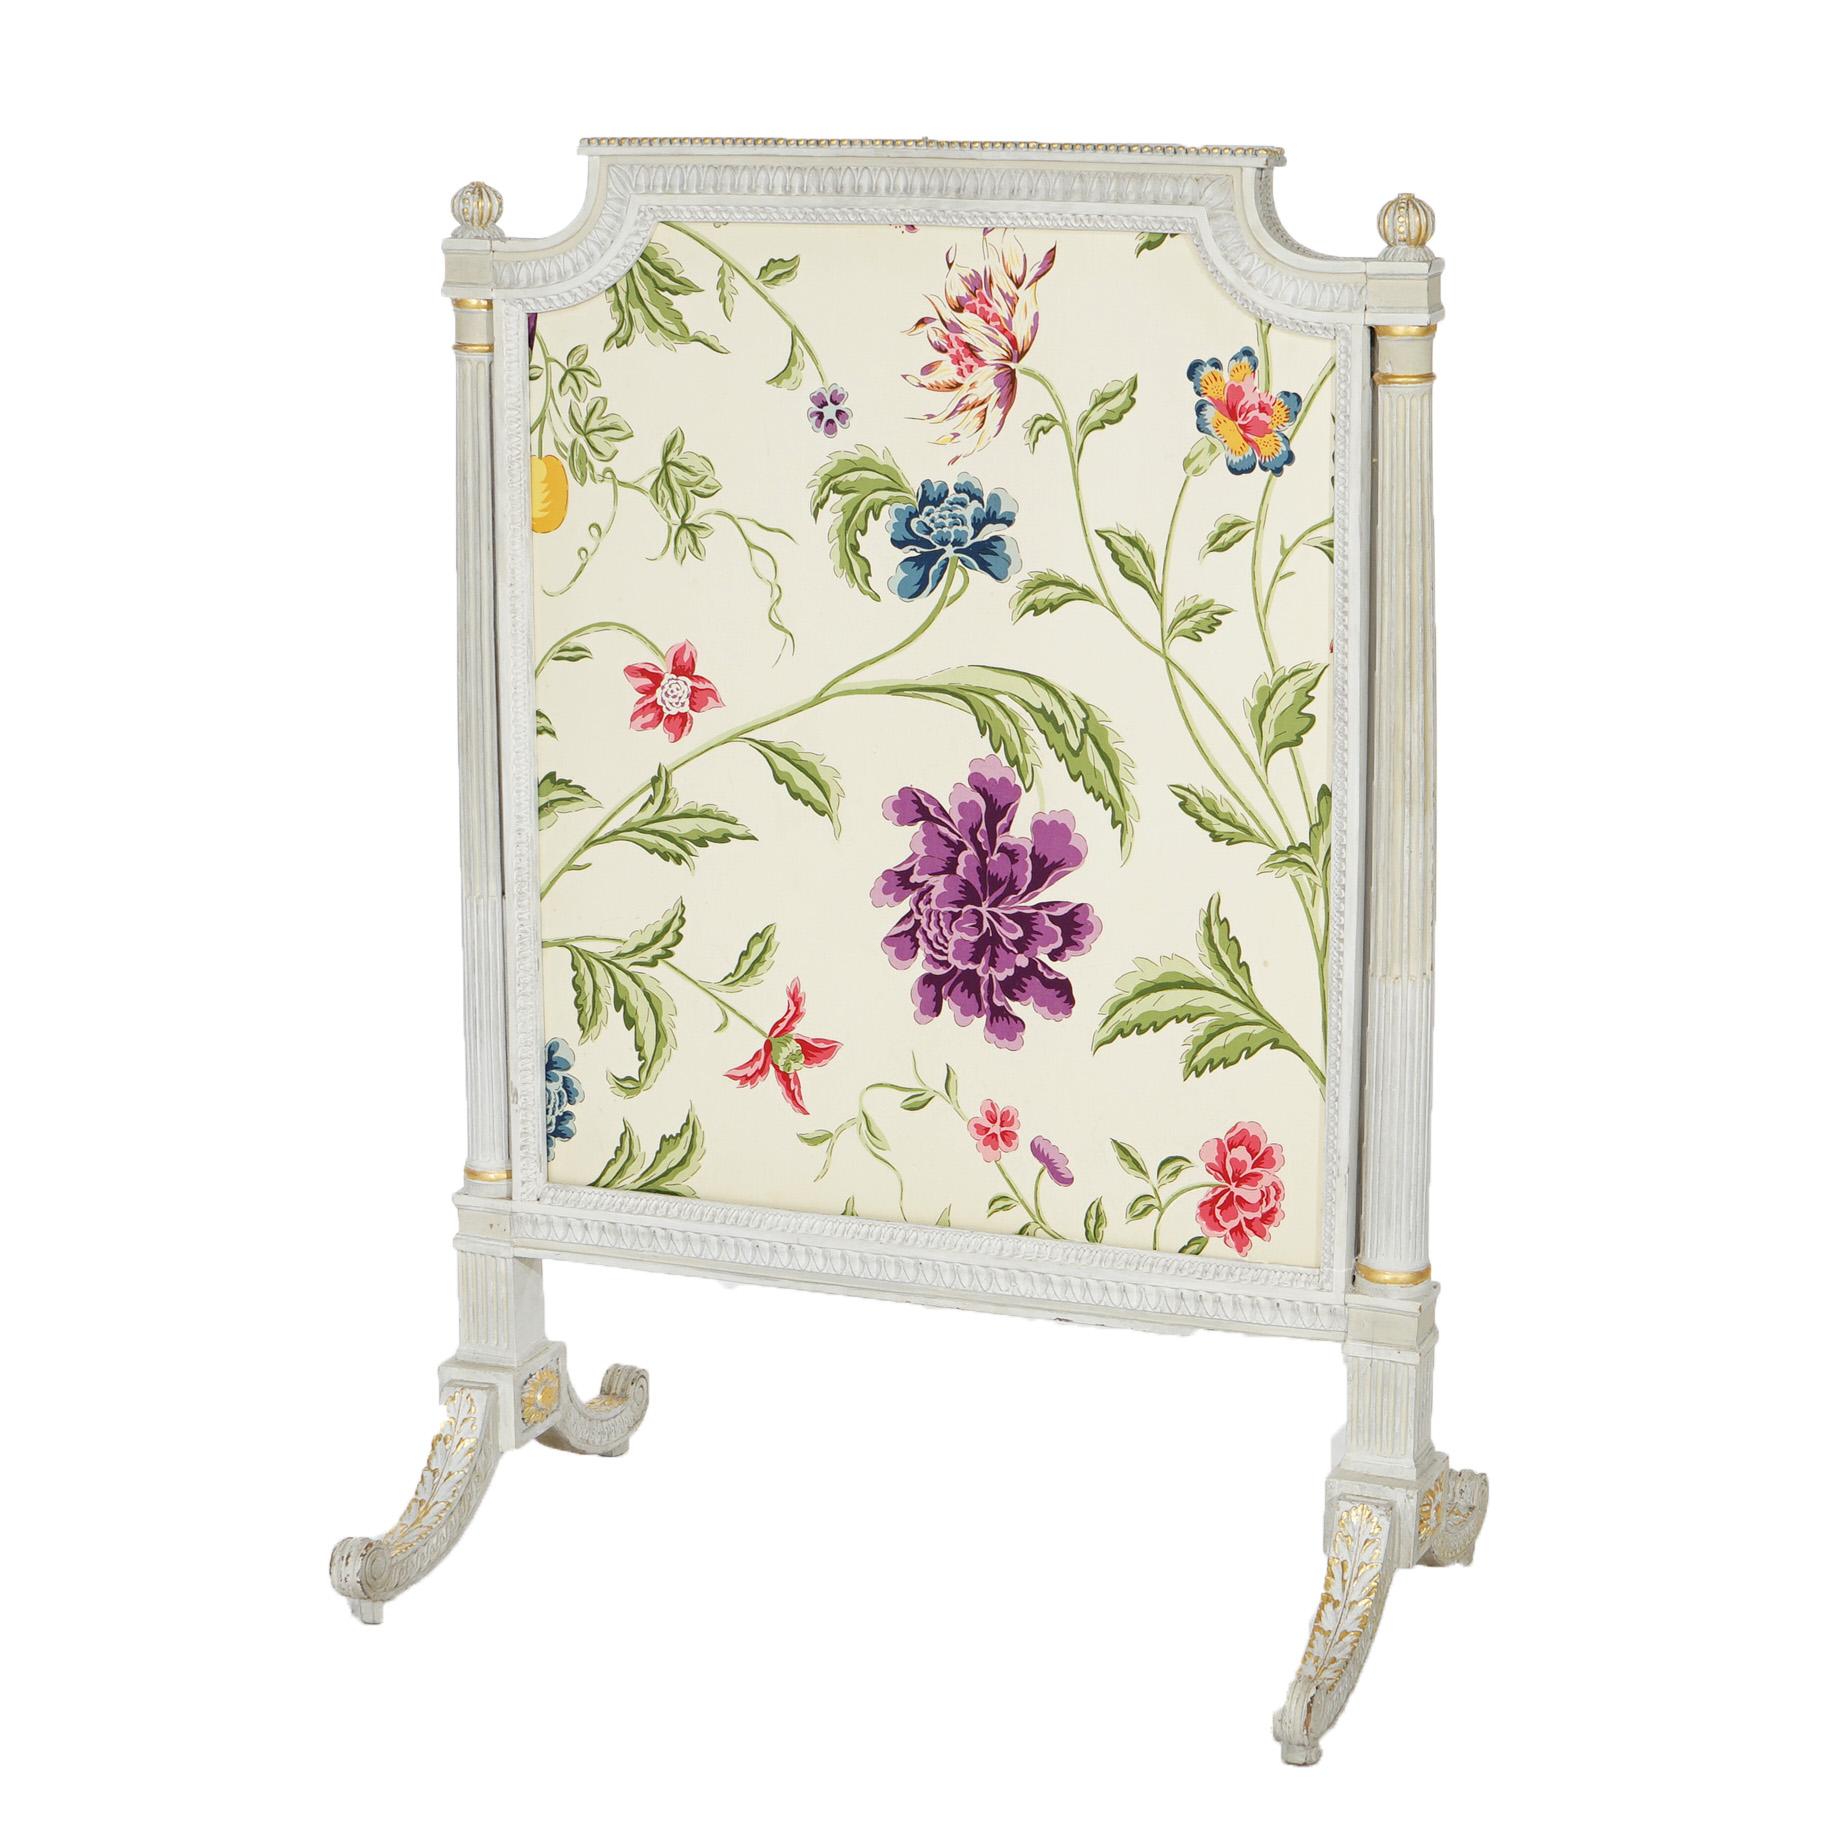 A French Louis XVI style fire screen offers white painted cared wood frame with gilt highlights and floral fabric, 20th century

Measures - 40